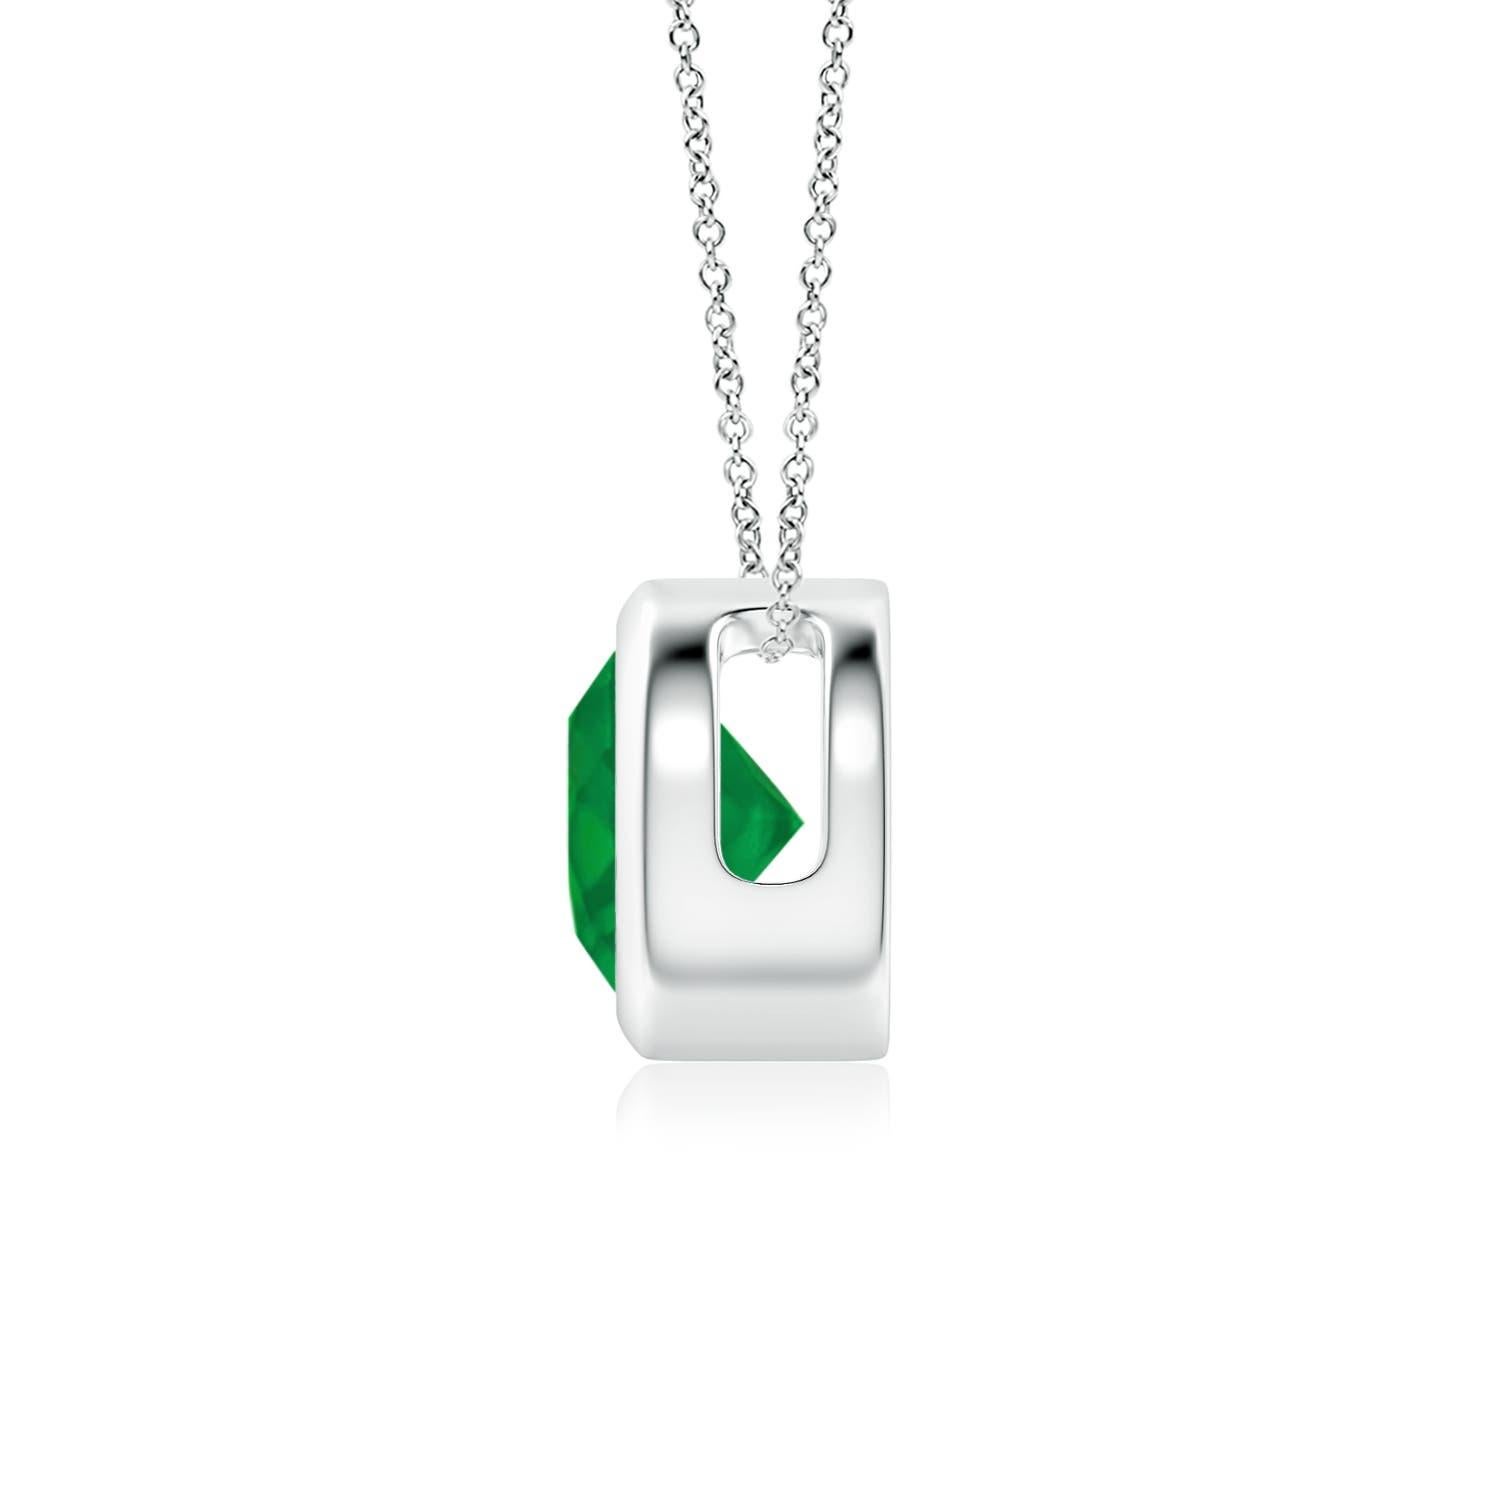 This classic solitaire emerald pendant's beautiful design makes the center stone appear like it's floating on the chain. The lush green emerald is secured in a bezel setting. Crafted in Platinum, this round emerald pendant is simple yet